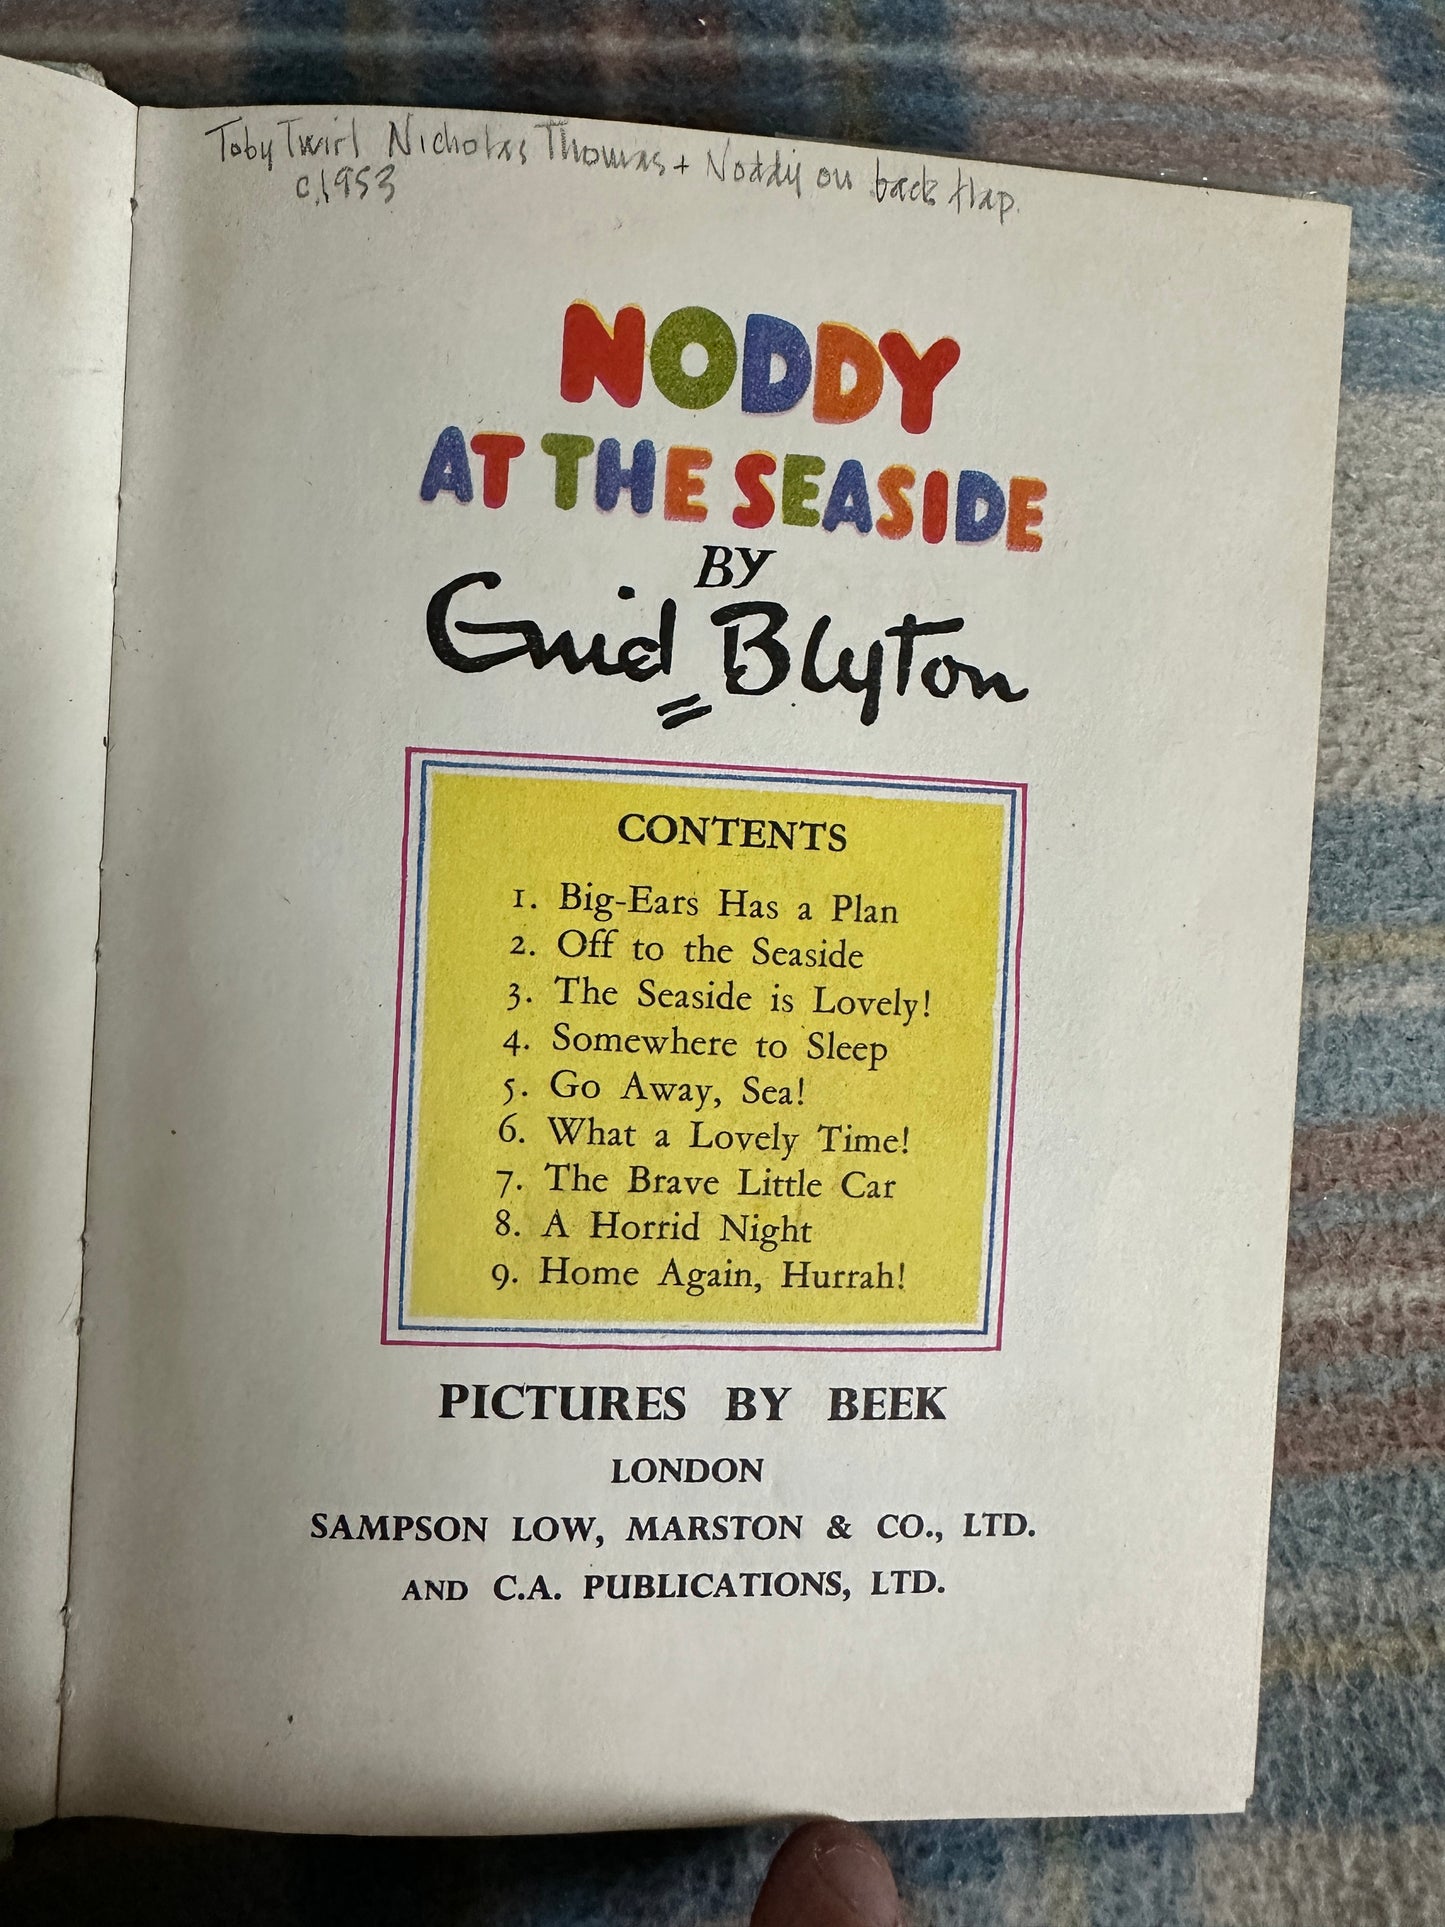 1953*1st*Noddy At The Seaside - Enid Blyton(Beek) Sampson Low, Marston & Co Ltd and C. A. Publications, Ltd